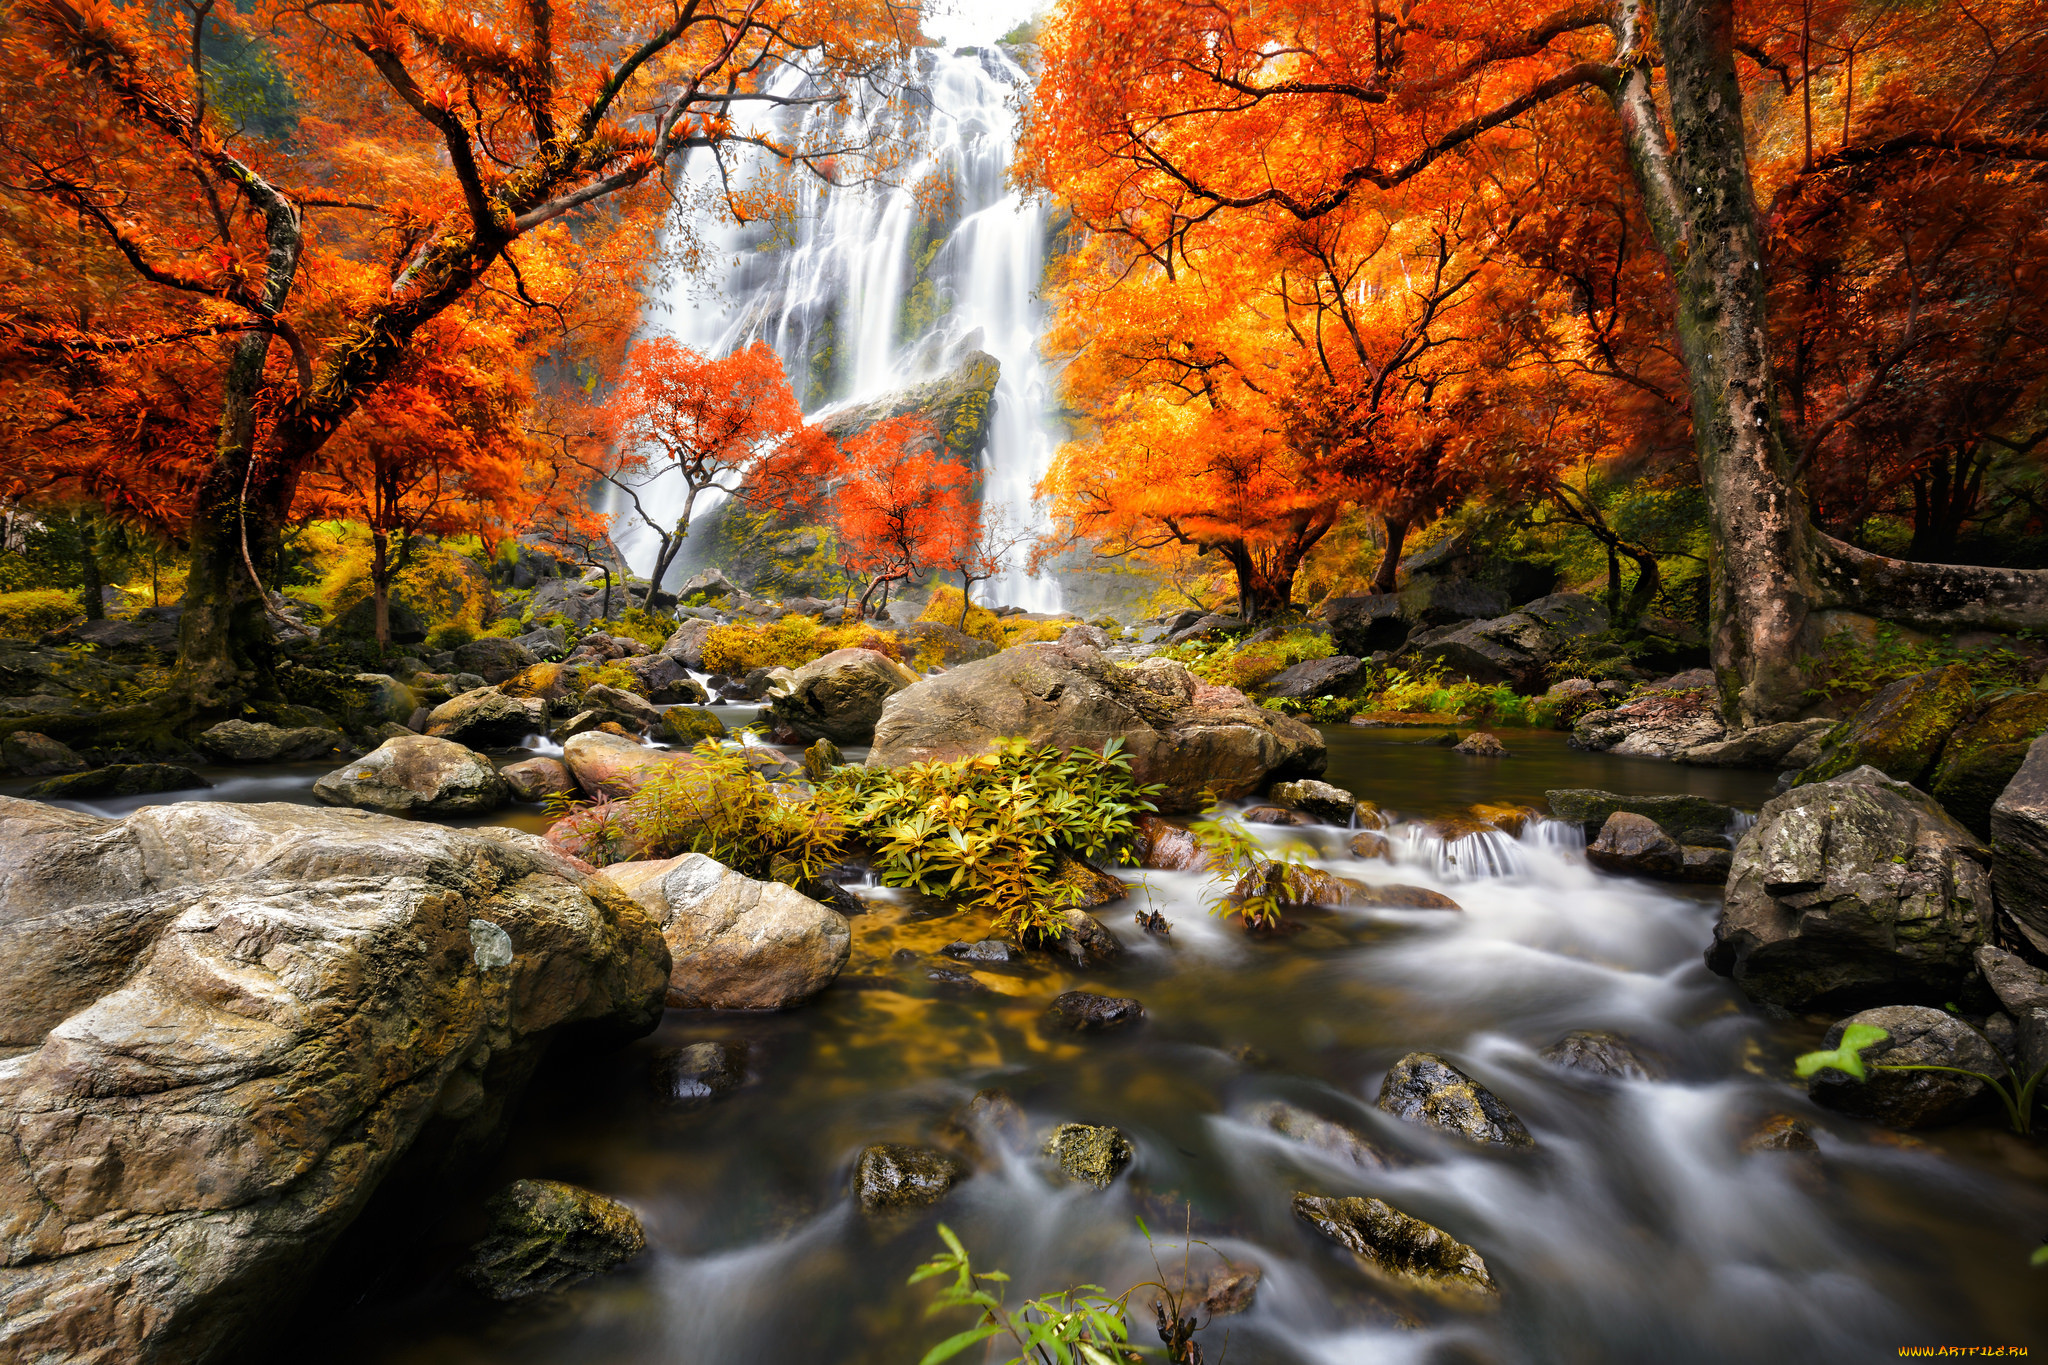 , , , , , , , , nature, river, landscape, forest, trees, autumn, scenery, view, waterfall, water